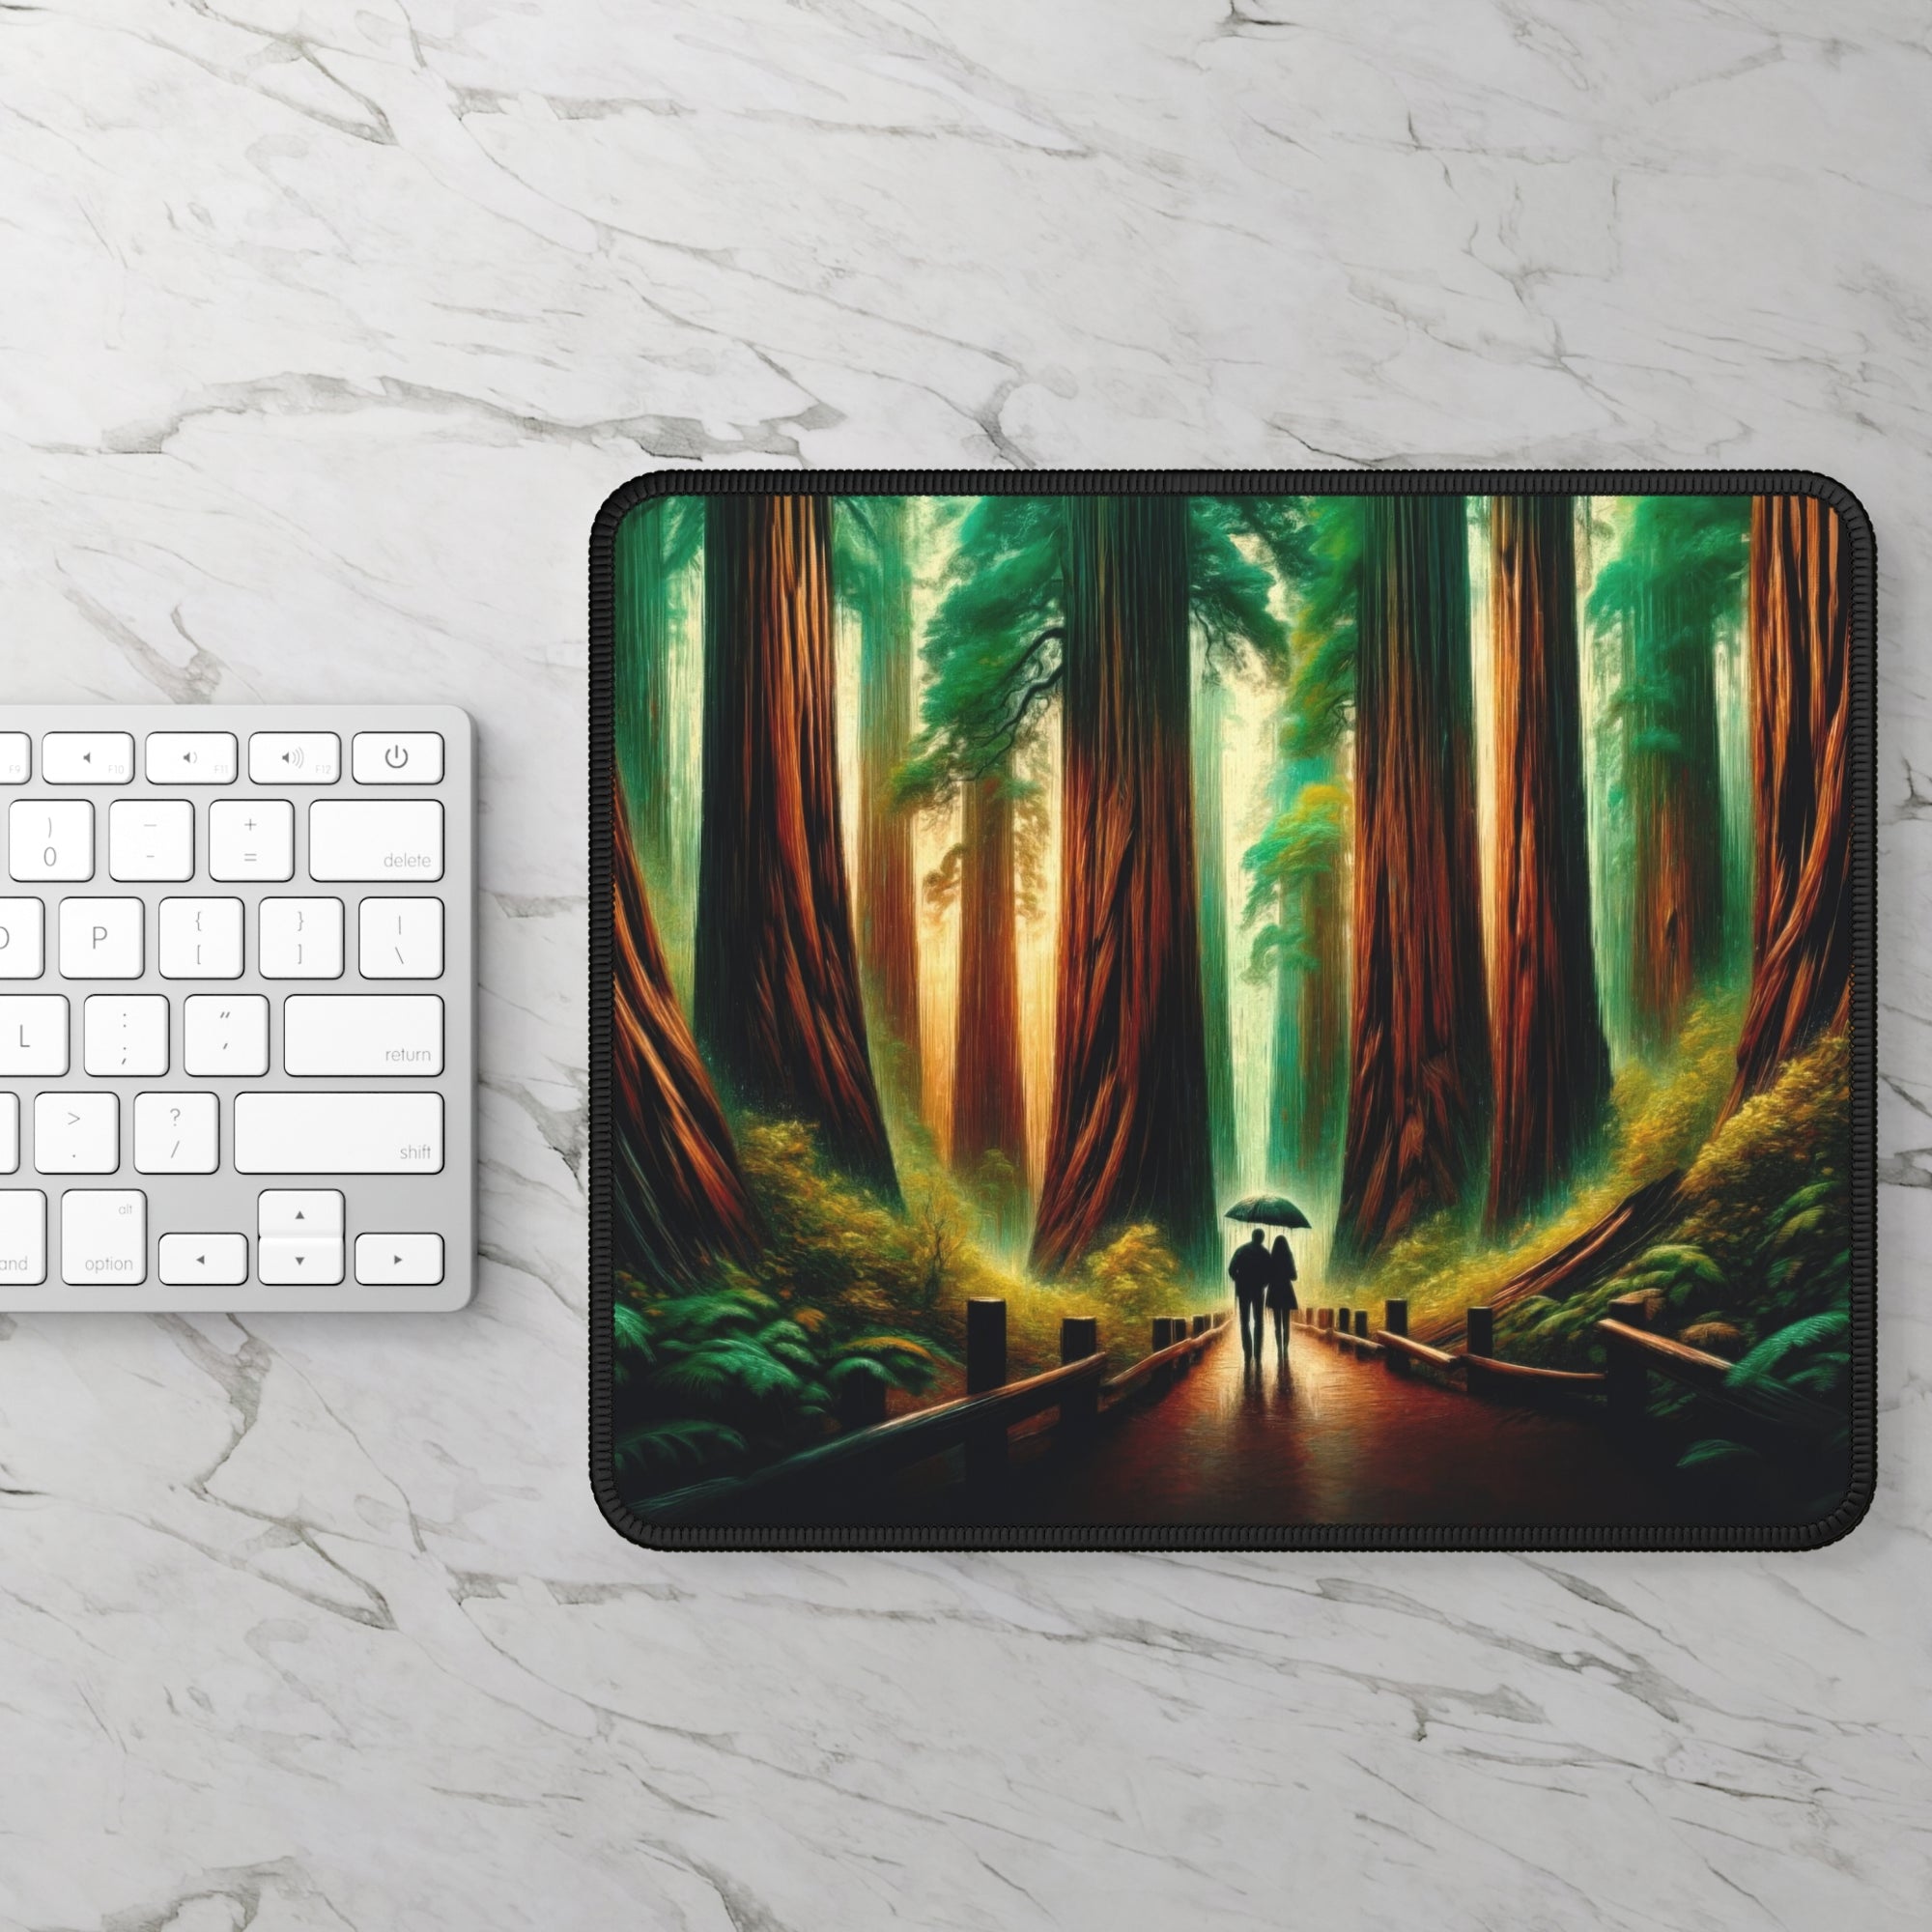 Under the Redwood Canopy Gaming Mouse Pad